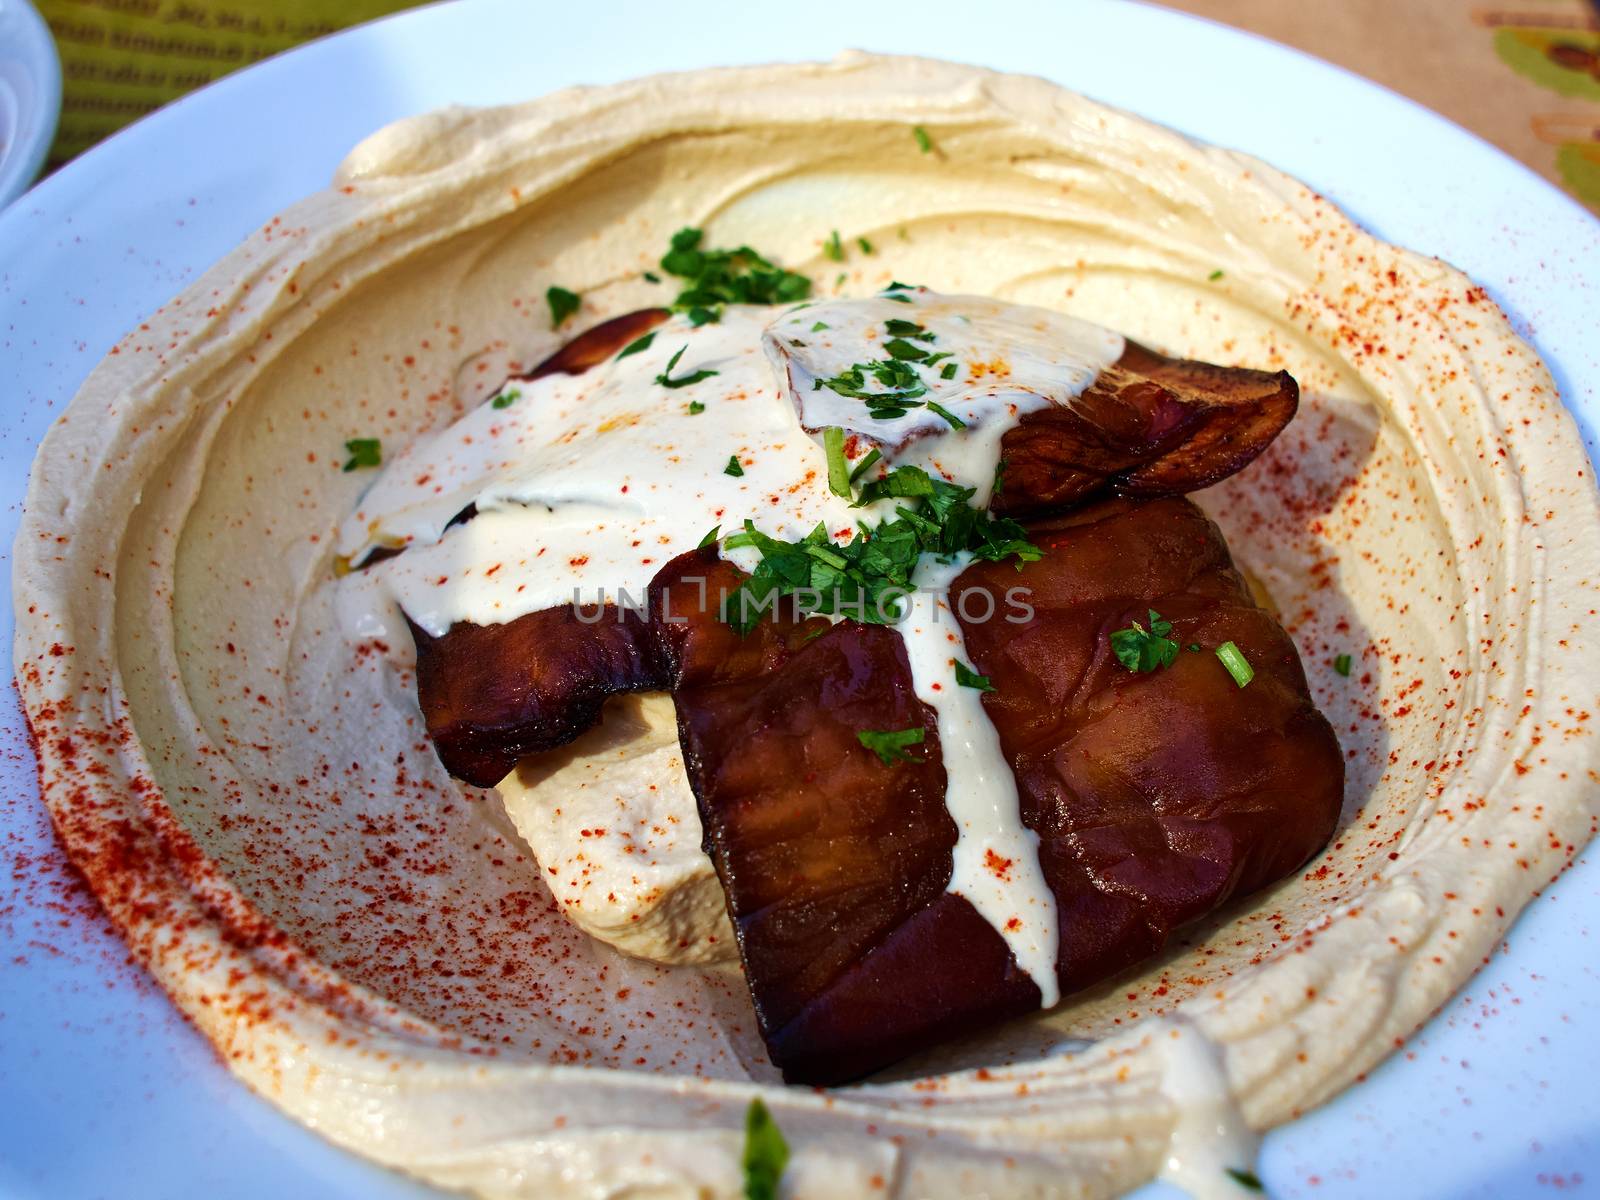 Hummus Middle East food by Ronyzmbow